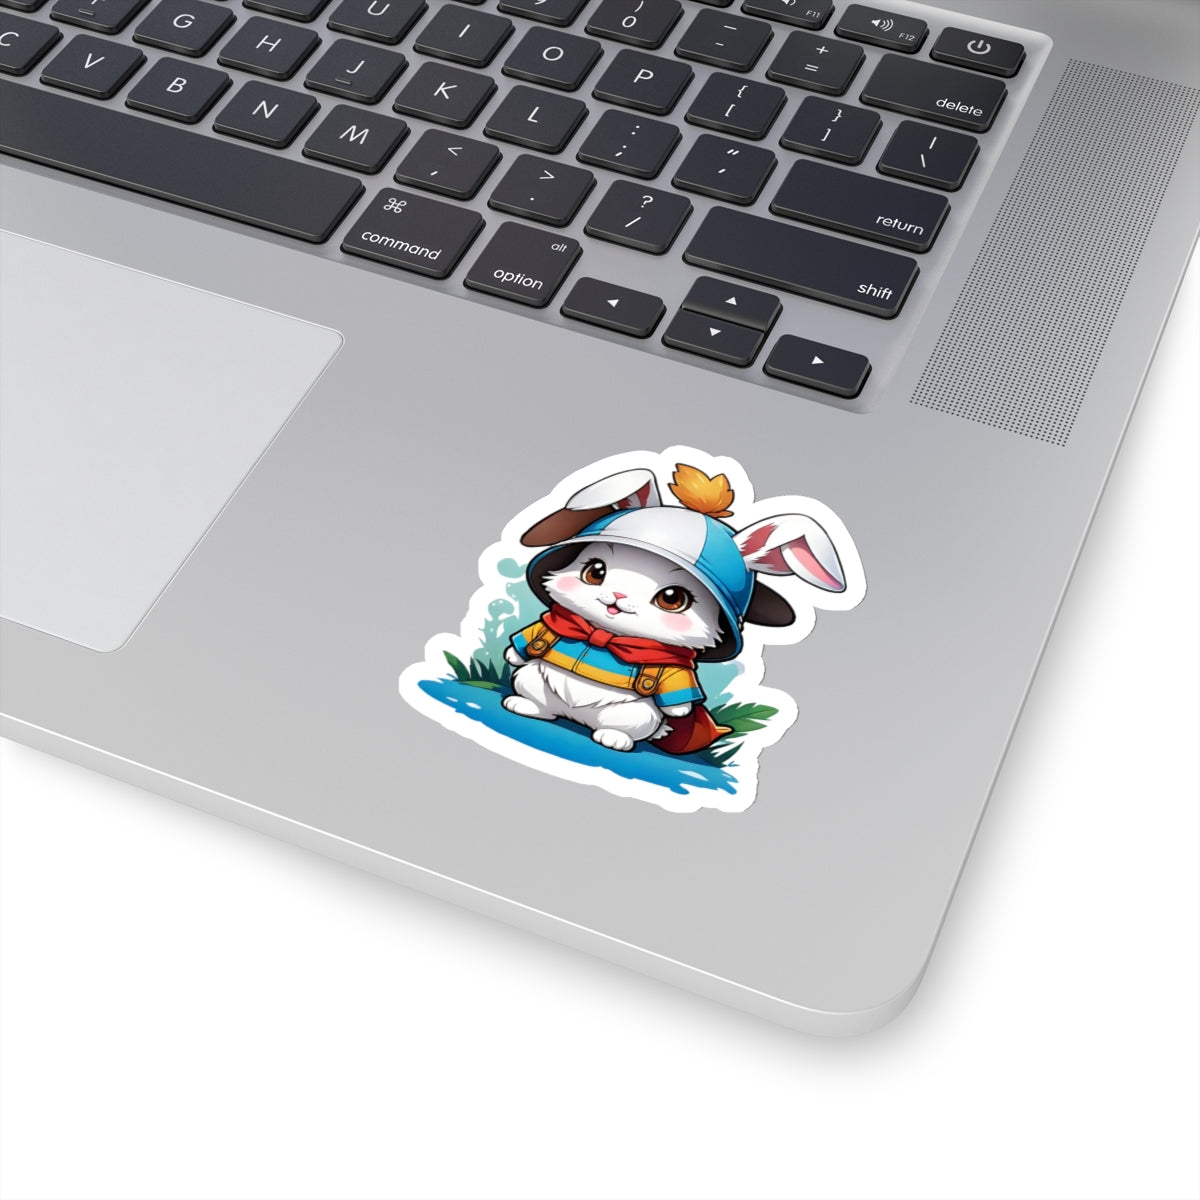 Adorable Bunny Charm Sticker | Bunny Sticker on Laptop for laptop